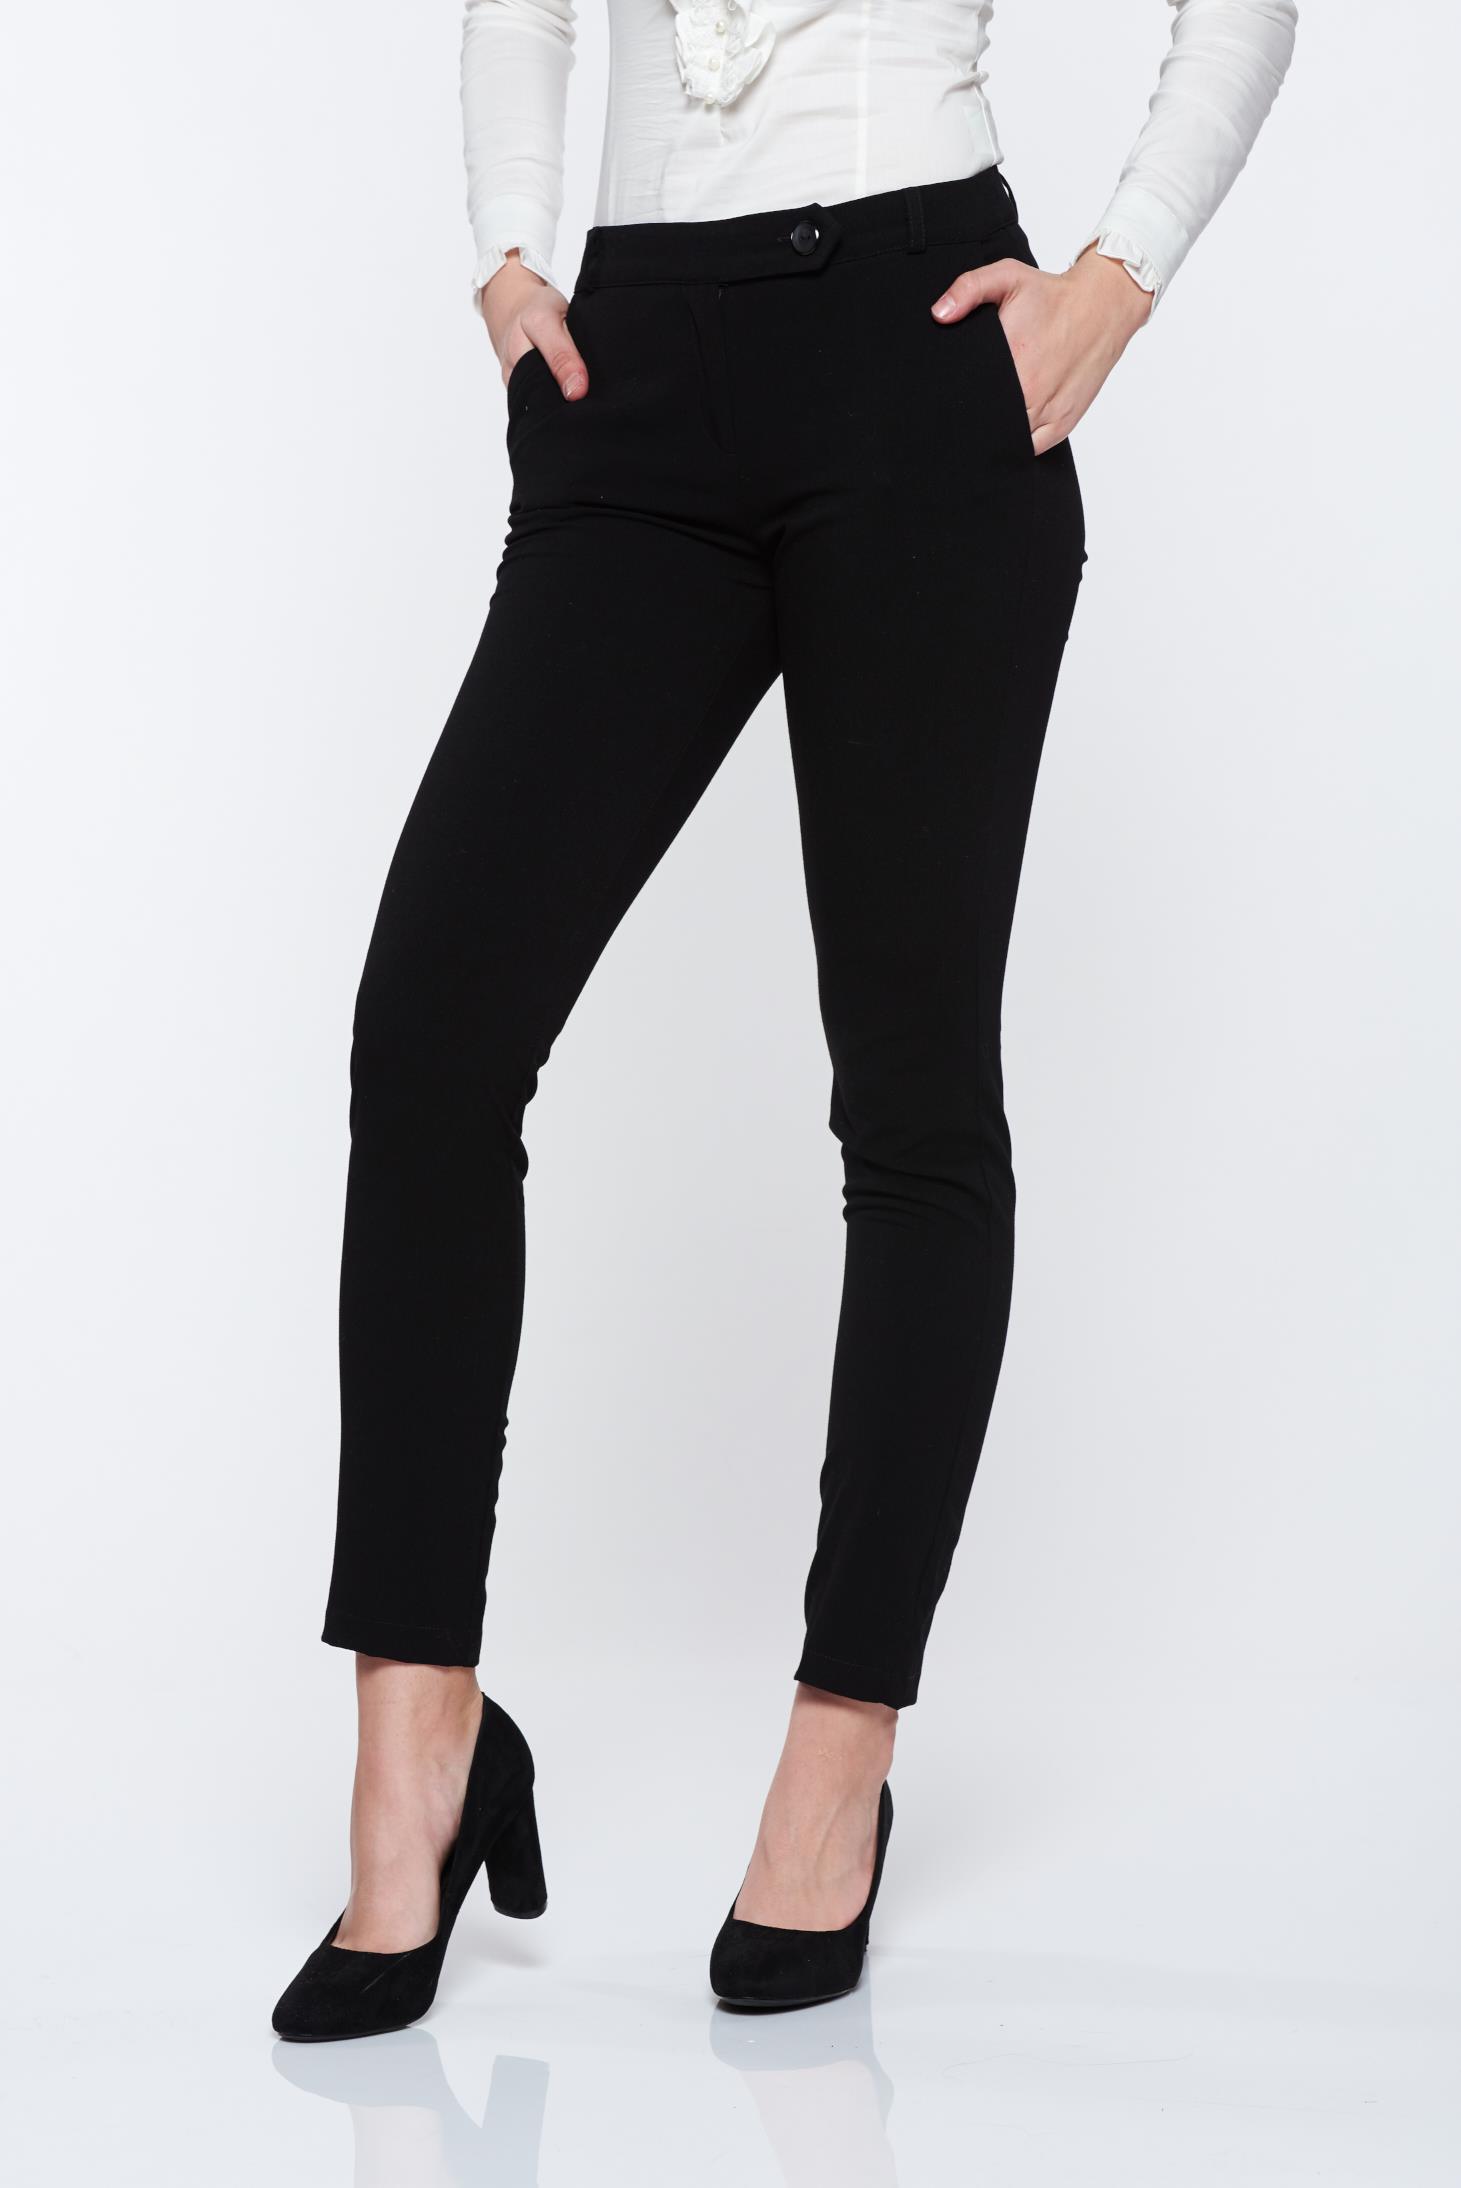 PrettyGirl black office cloth trousers with medium waist with pockets